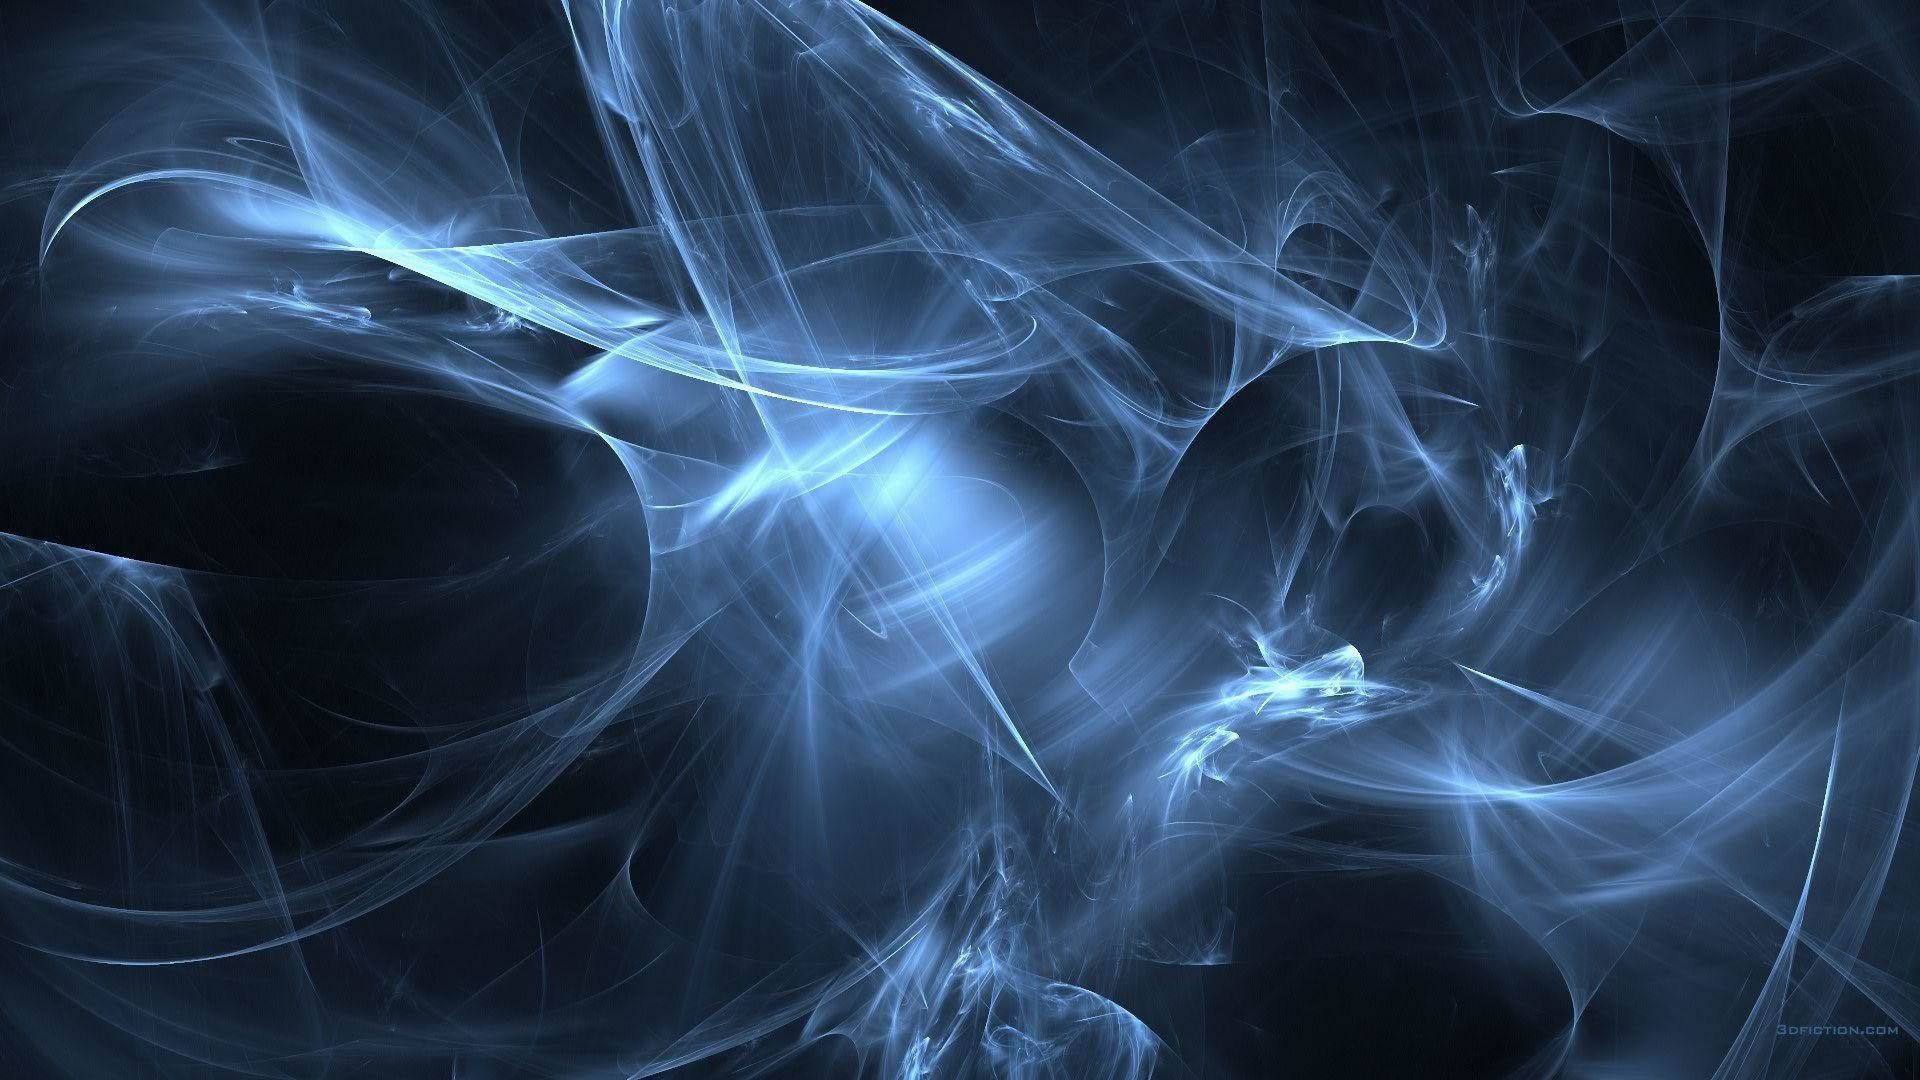 3d moving wallpapers hd,fractal art,water,electric blue,organism,graphics